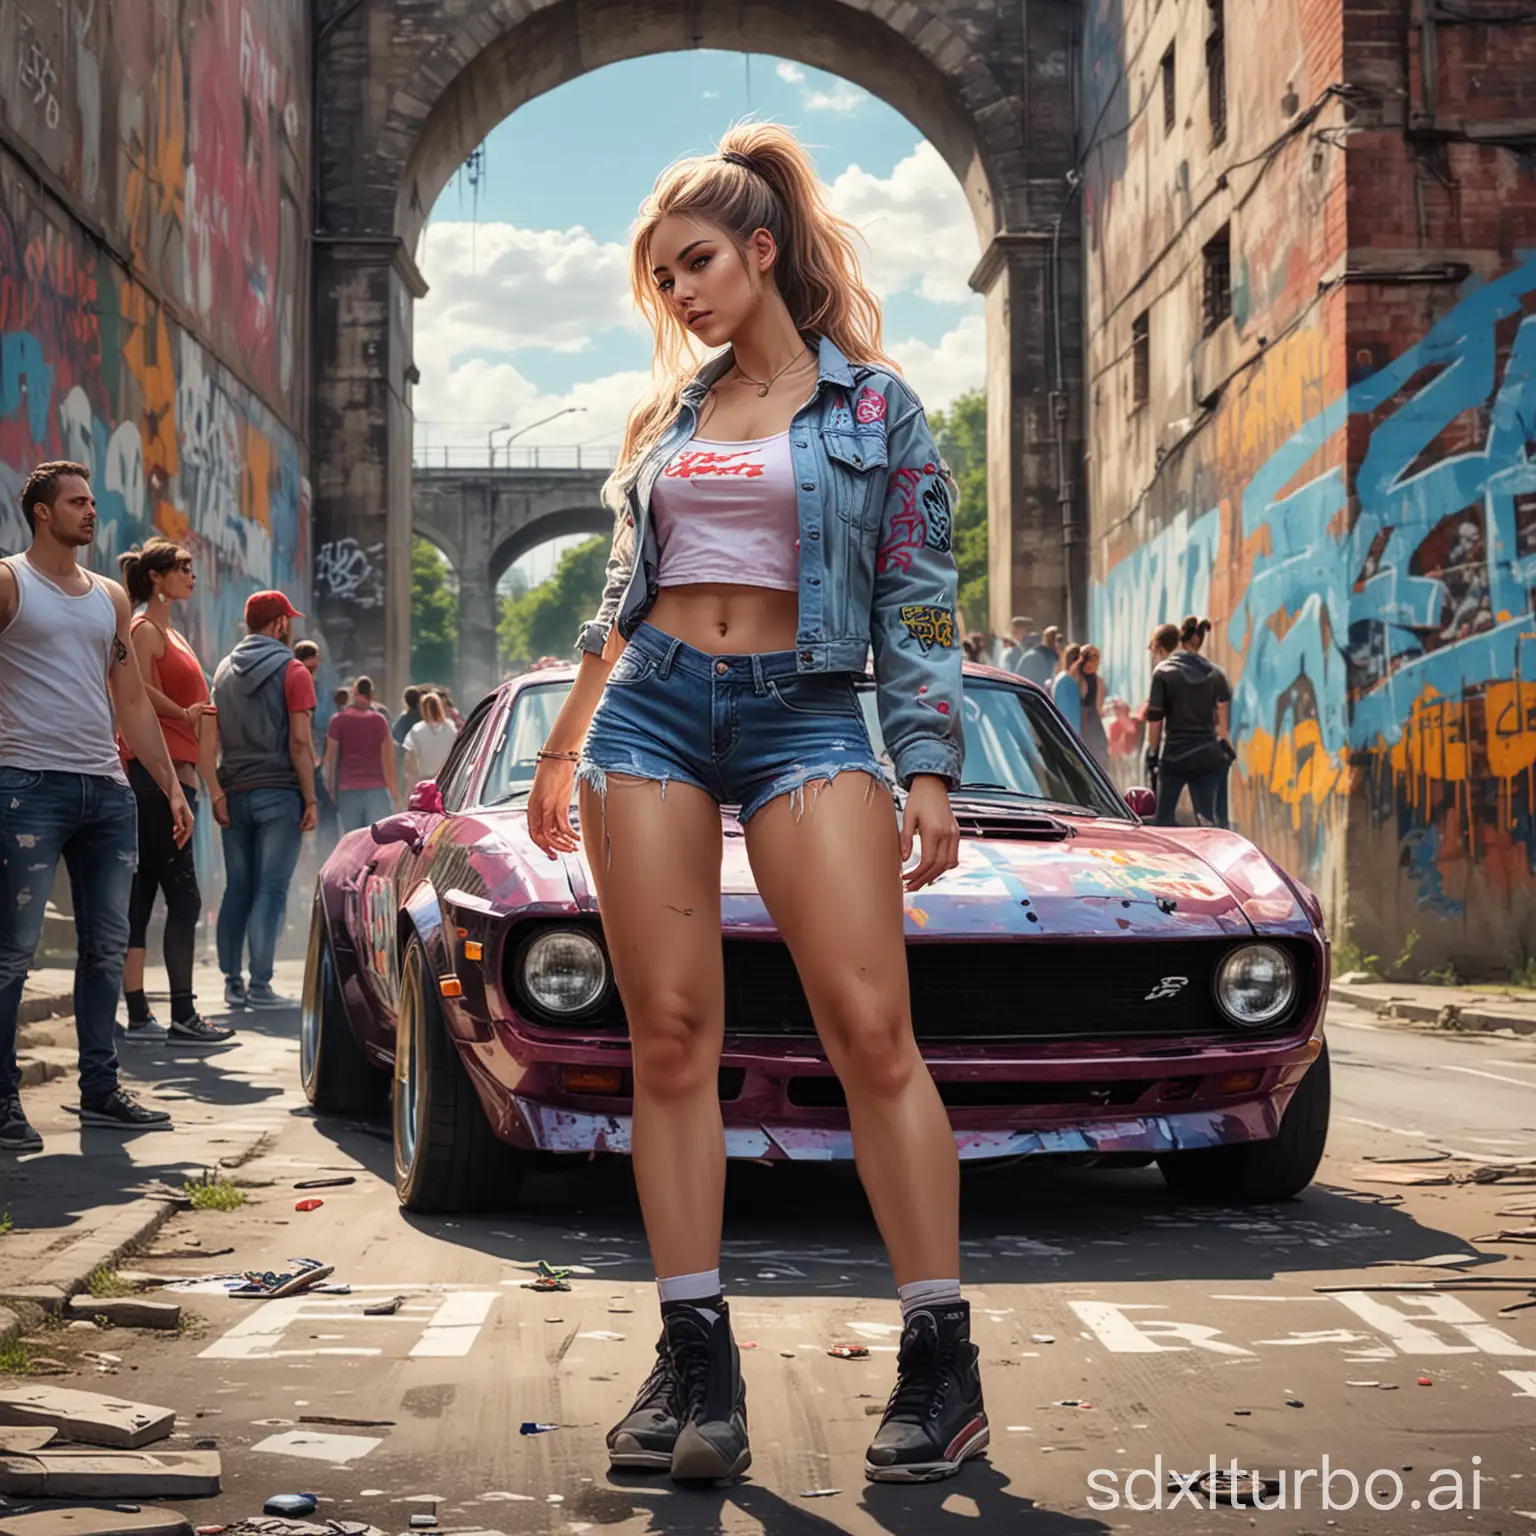 Street-Racer-Girl-Initiates-Race-with-Spectators-and-Viaduct-Background